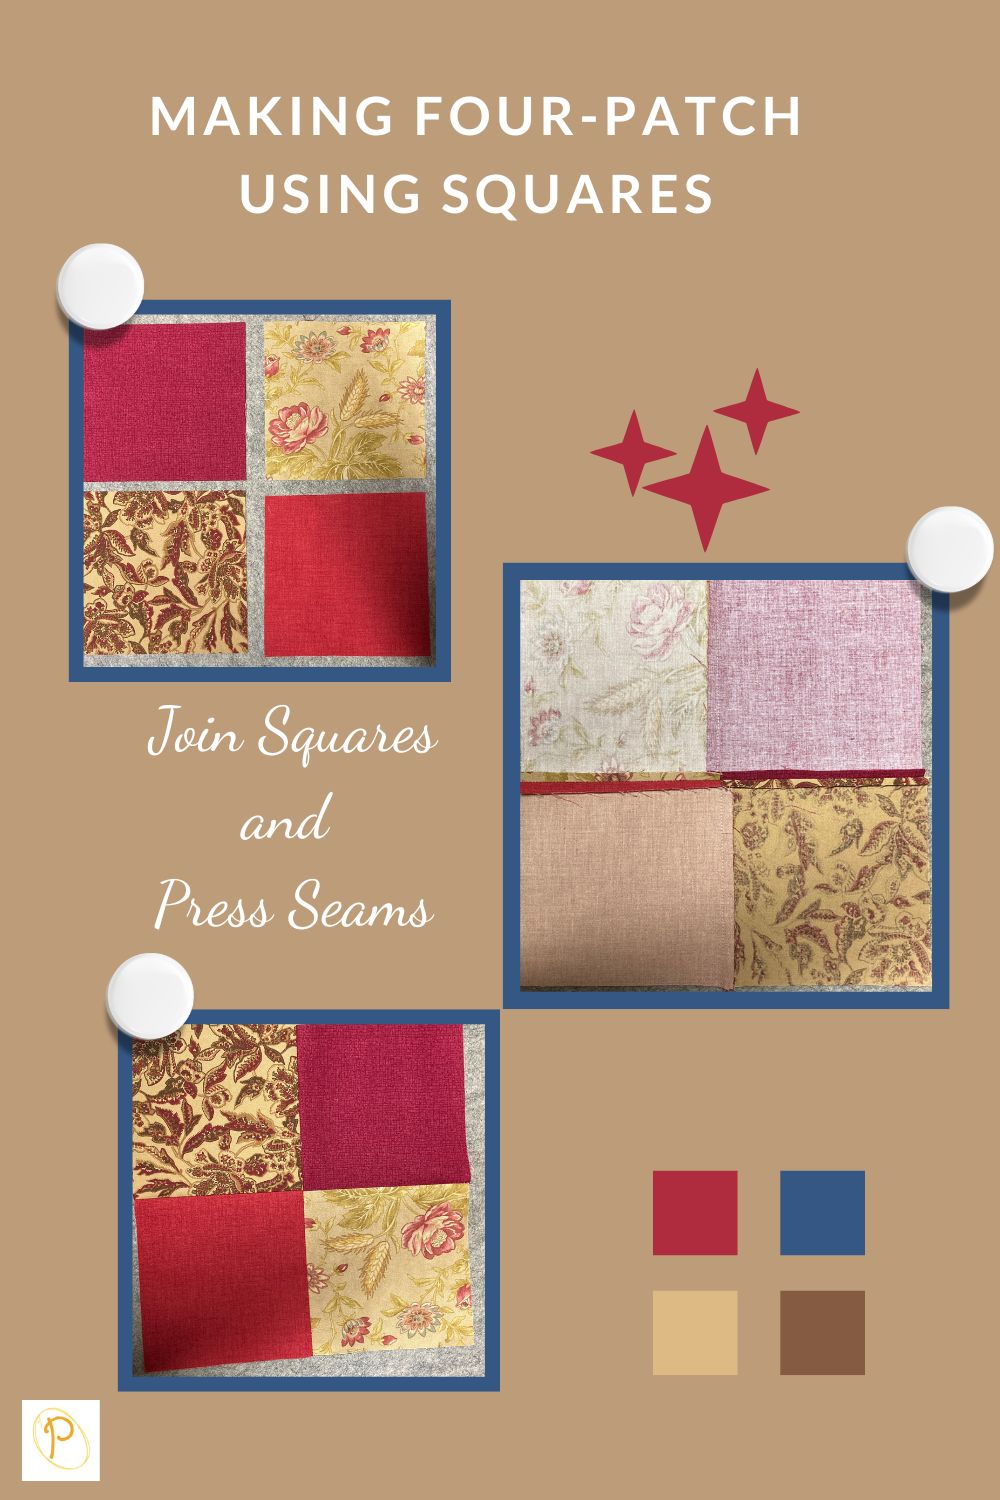 Making Four-Patch using squares